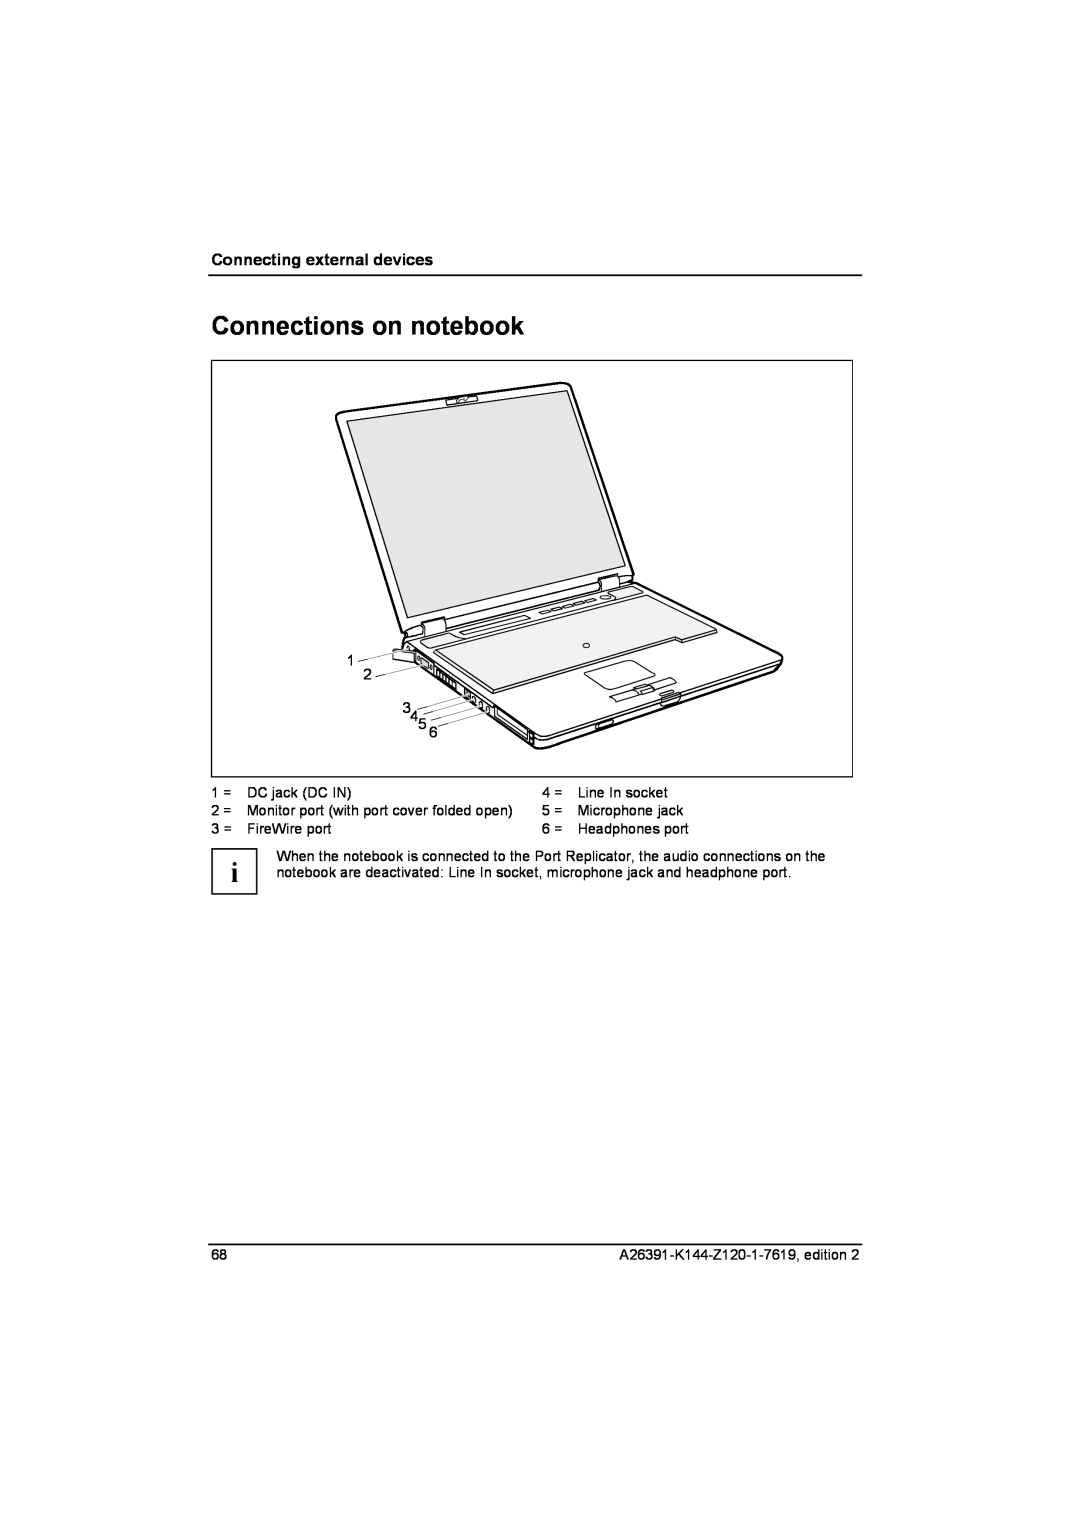 Fujitsu S SERIES Connections on notebook, Connecting external devices, Headphones port, A26391-K144-Z120-1-7619, edition 